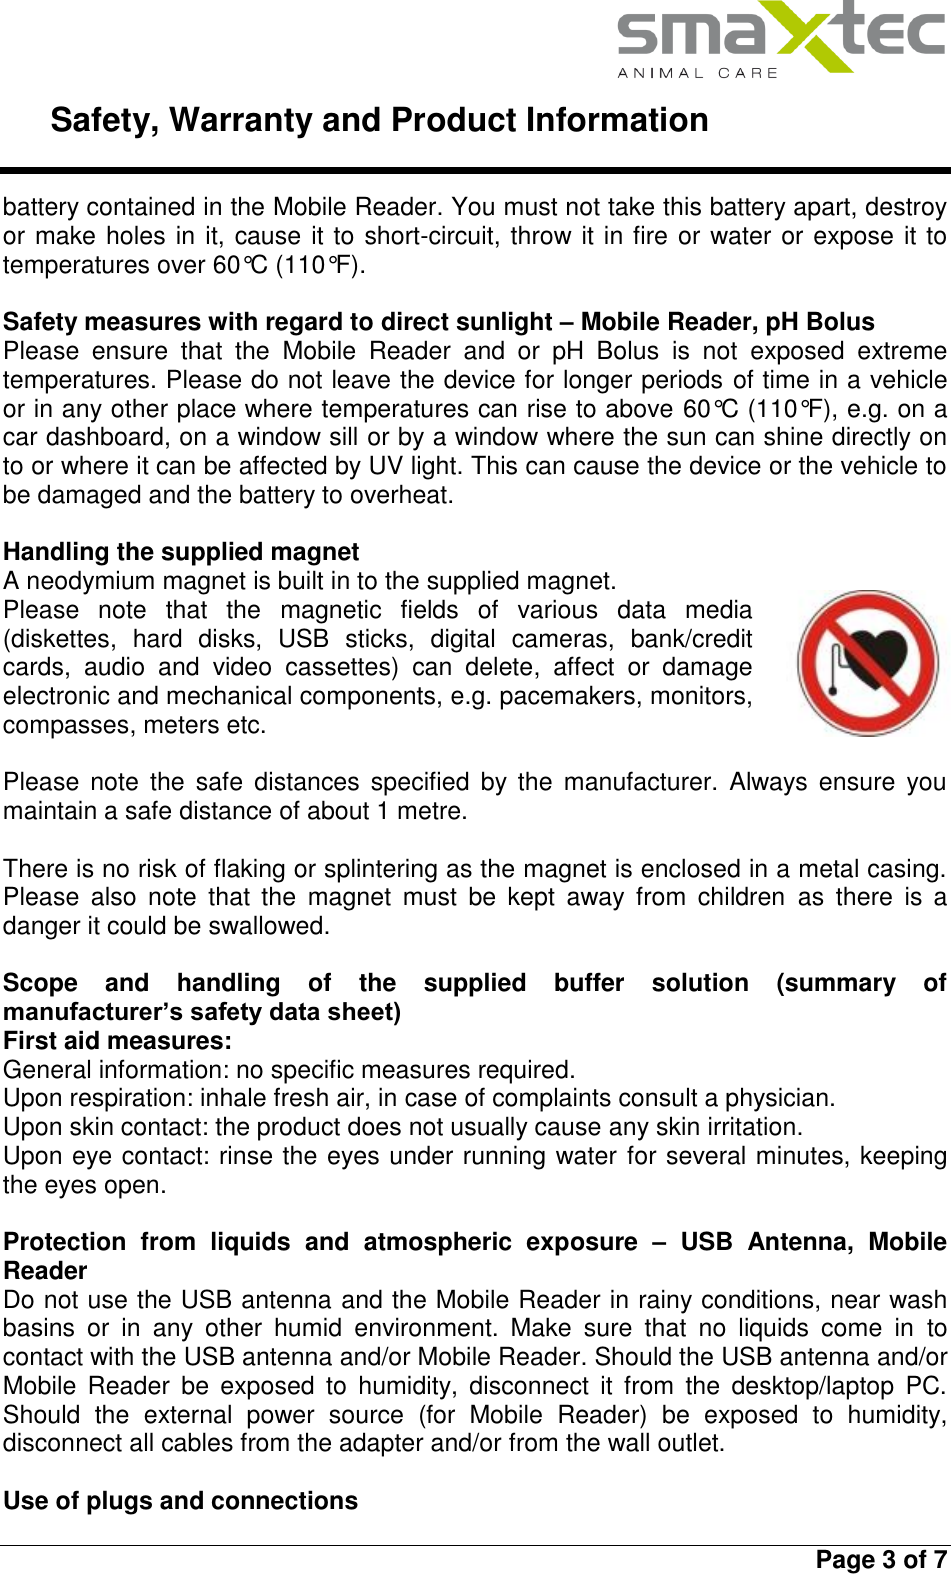     Safety, Warranty and Product Information   Page 3 of 7  battery contained in the Mobile Reader. You must not take this battery apart, destroy or make holes in it, cause it to short-circuit, throw it in fire or water or expose it to temperatures over 60°C (110°F).  Safety measures with regard to direct sunlight – Mobile Reader, pH Bolus Please  ensure  that  the  Mobile  Reader  and  or  pH  Bolus  is  not  exposed  extreme temperatures. Please do not leave the device for longer periods of time in a vehicle or in any other place where temperatures can rise to above 60°C (110°F), e.g. on a car dashboard, on a window sill or by a window where the sun can shine directly on to or where it can be affected by UV light. This can cause the device or the vehicle to be damaged and the battery to overheat.  Handling the supplied magnet A neodymium magnet is built in to the supplied magnet.  Please  note  that  the  magnetic  fields  of  various  data  media (diskettes,  hard  disks,  USB  sticks,  digital  cameras,  bank/credit cards,  audio  and  video  cassettes)  can  delete,  affect  or  damage electronic and mechanical components, e.g. pacemakers, monitors, compasses, meters etc.   Please  note the  safe  distances  specified  by  the manufacturer.  Always  ensure  you maintain a safe distance of about 1 metre.   There is no risk of flaking or splintering as the magnet is enclosed in a metal casing. Please  also  note  that  the  magnet  must  be  kept  away  from  children  as  there  is  a danger it could be swallowed.  Scope  and  handling  of  the  supplied  buffer  solution  (summary  of manufacturer’s safety data sheet) First aid measures: General information: no specific measures required. Upon respiration: inhale fresh air, in case of complaints consult a physician. Upon skin contact: the product does not usually cause any skin irritation. Upon eye contact: rinse the eyes under running water for several minutes, keeping the eyes open.  Protection  from  liquids  and  atmospheric  exposure  –  USB  Antenna,  Mobile Reader Do not use the USB antenna and the Mobile Reader in rainy conditions, near wash basins  or  in  any  other  humid  environment.  Make  sure  that  no  liquids  come  in  to contact with the USB antenna and/or Mobile Reader. Should the USB antenna and/or Mobile  Reader  be  exposed  to  humidity,  disconnect  it  from  the  desktop/laptop  PC. Should  the  external  power  source  (for  Mobile  Reader)  be  exposed  to  humidity, disconnect all cables from the adapter and/or from the wall outlet.  Use of plugs and connections 